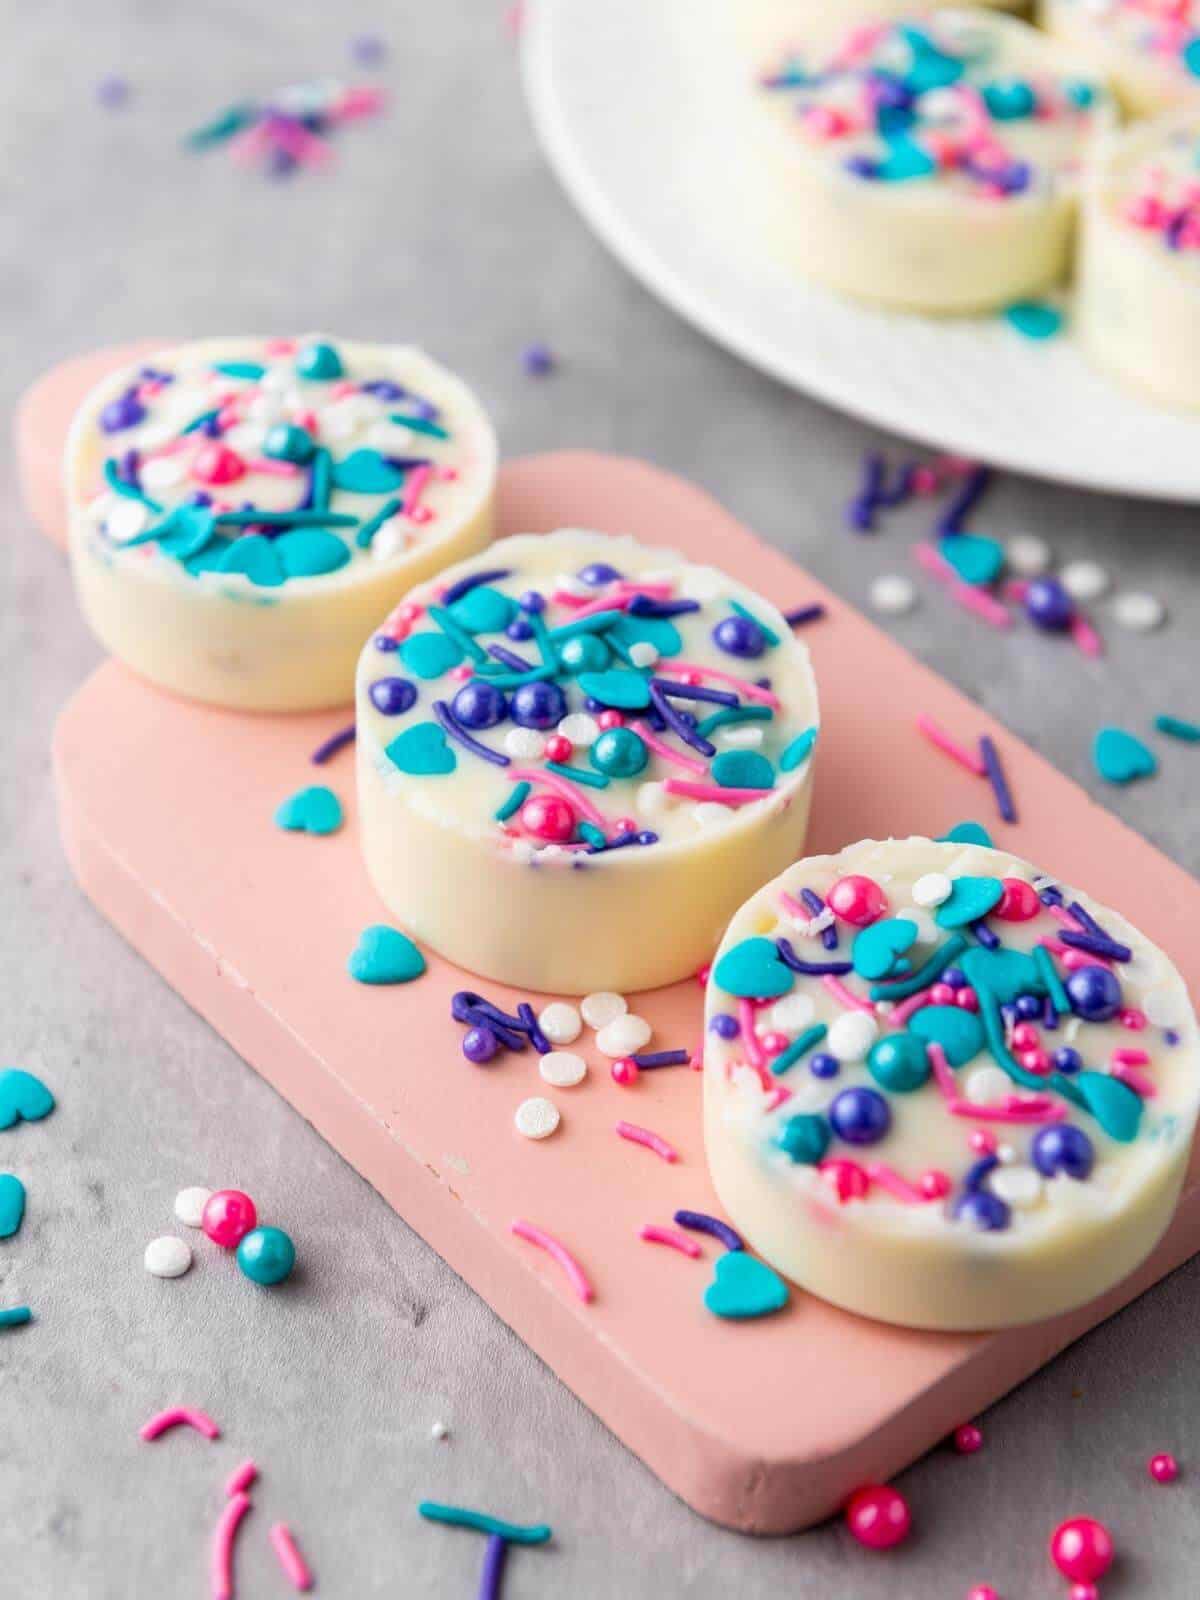 Three white chocolate covered oreos with colorful sprinkles.